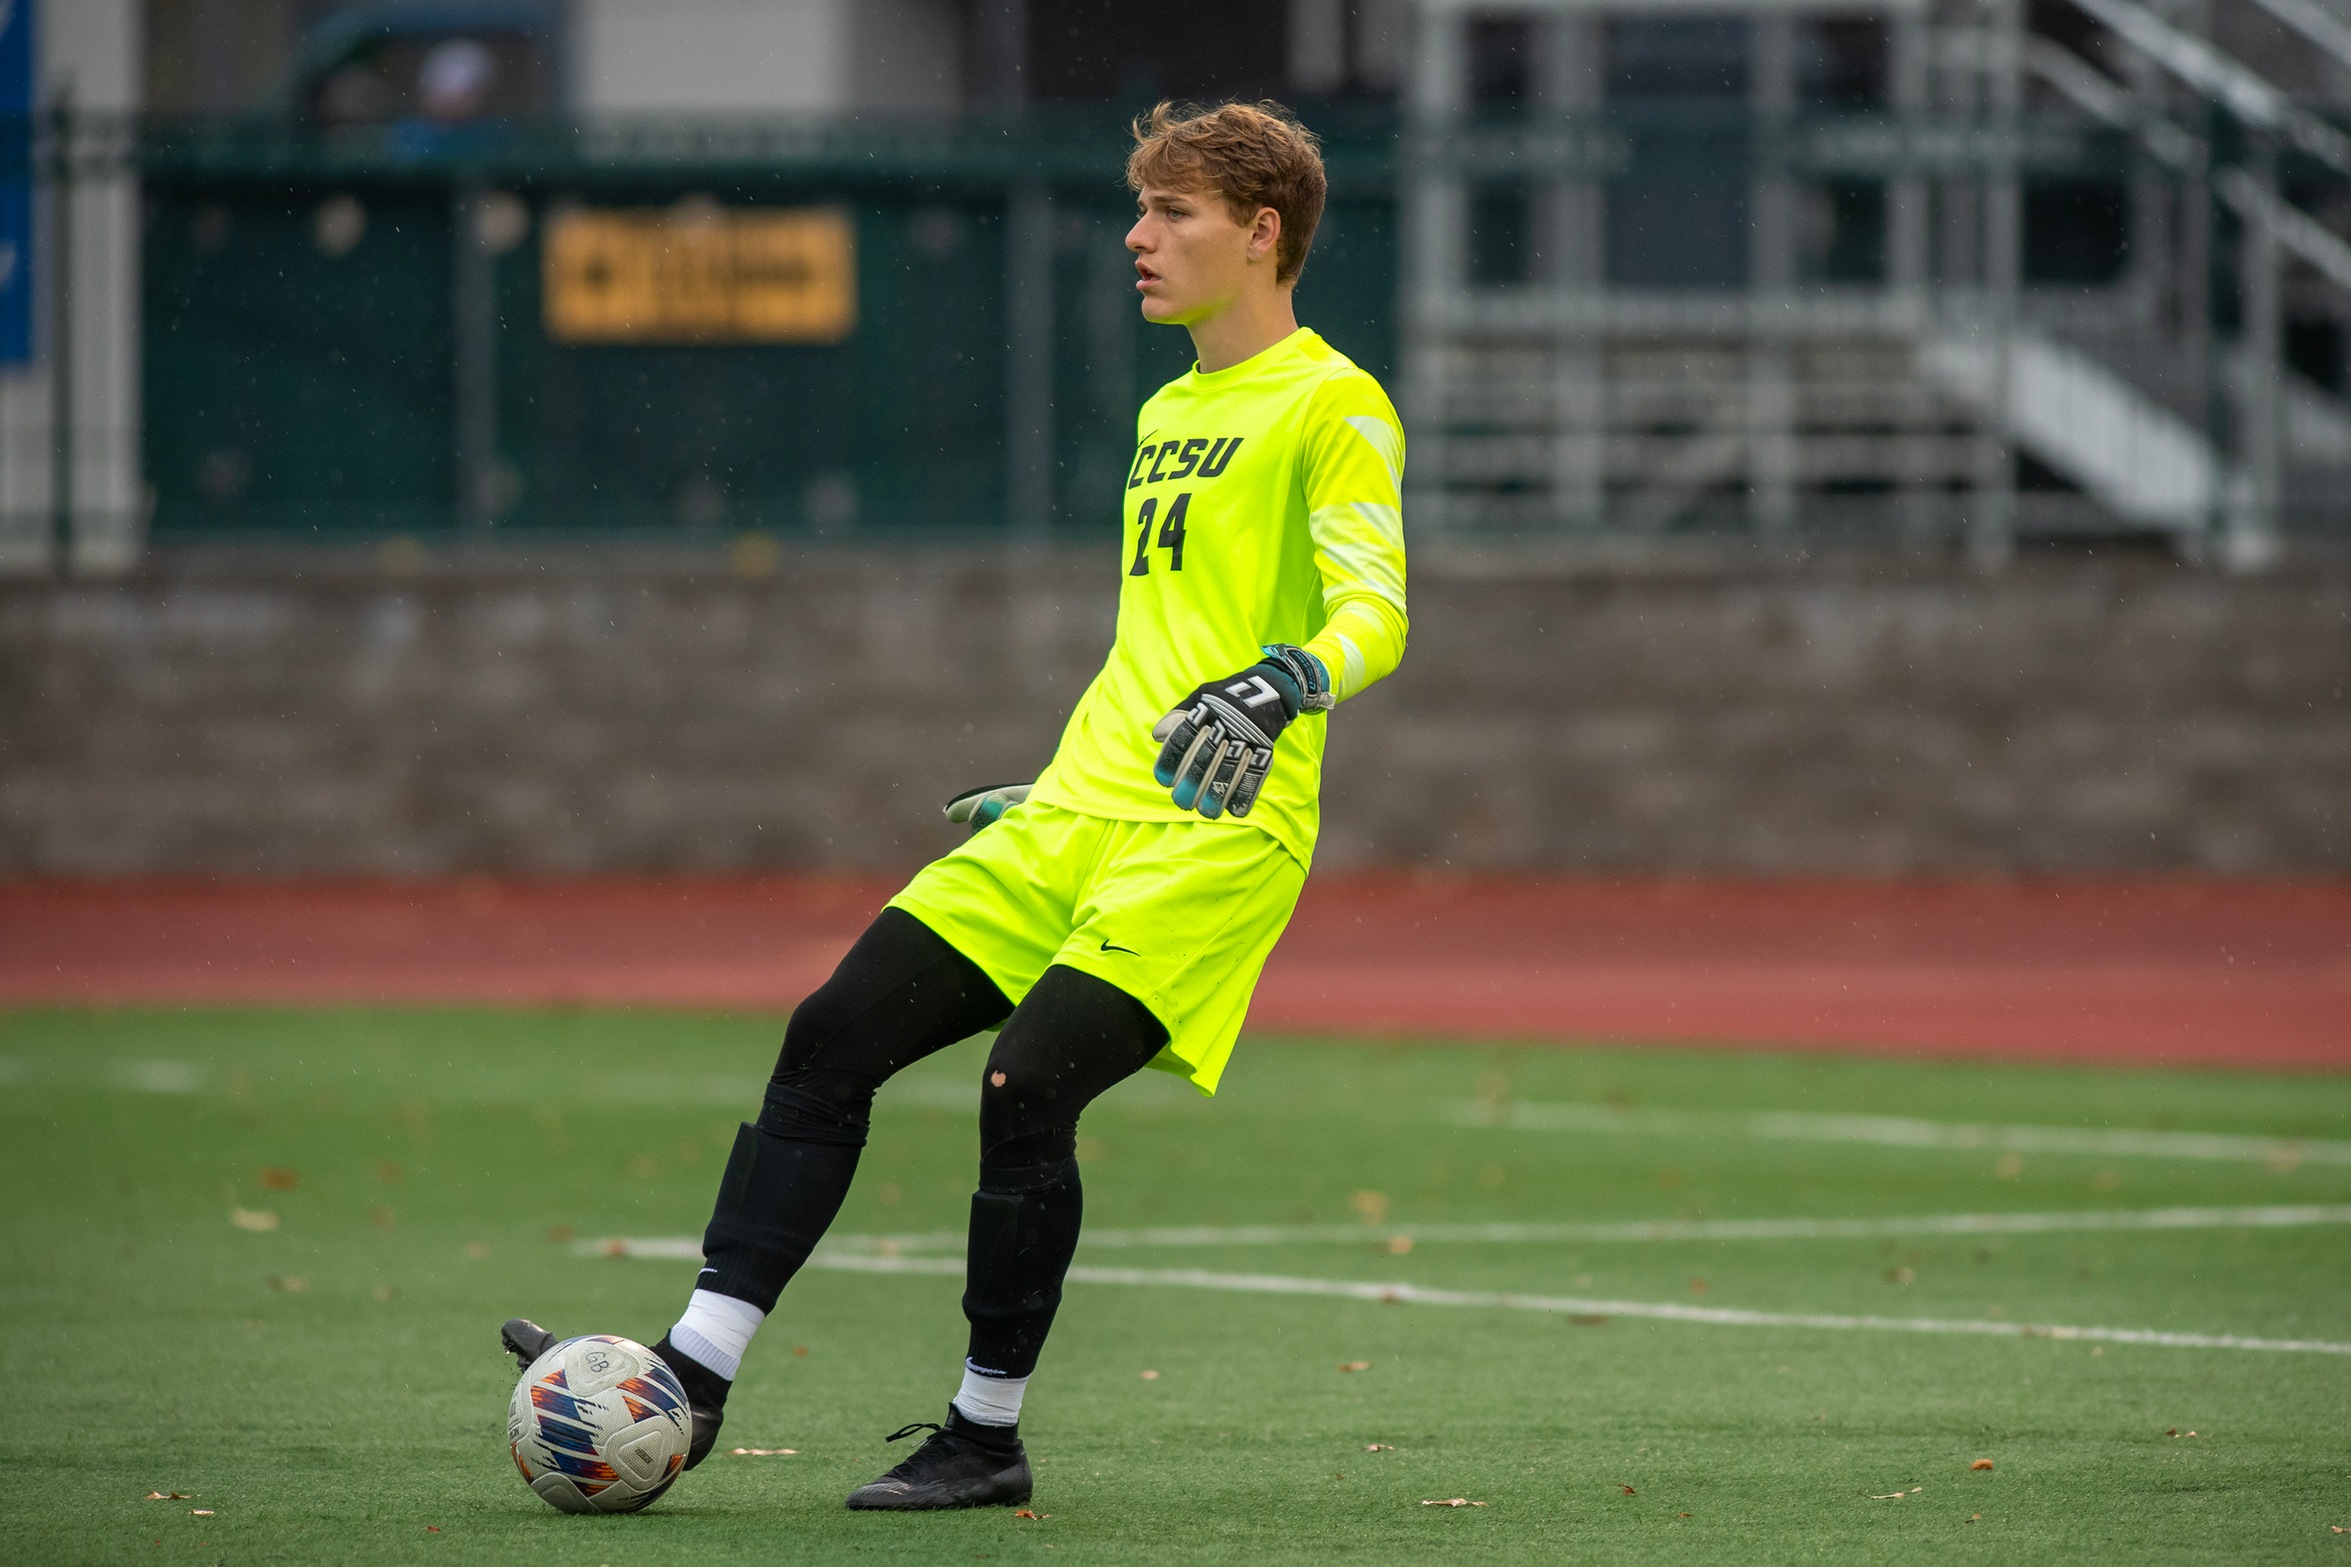 Daniel Wilmore made four saves on Sunday (Steve McLaughlin Photography)